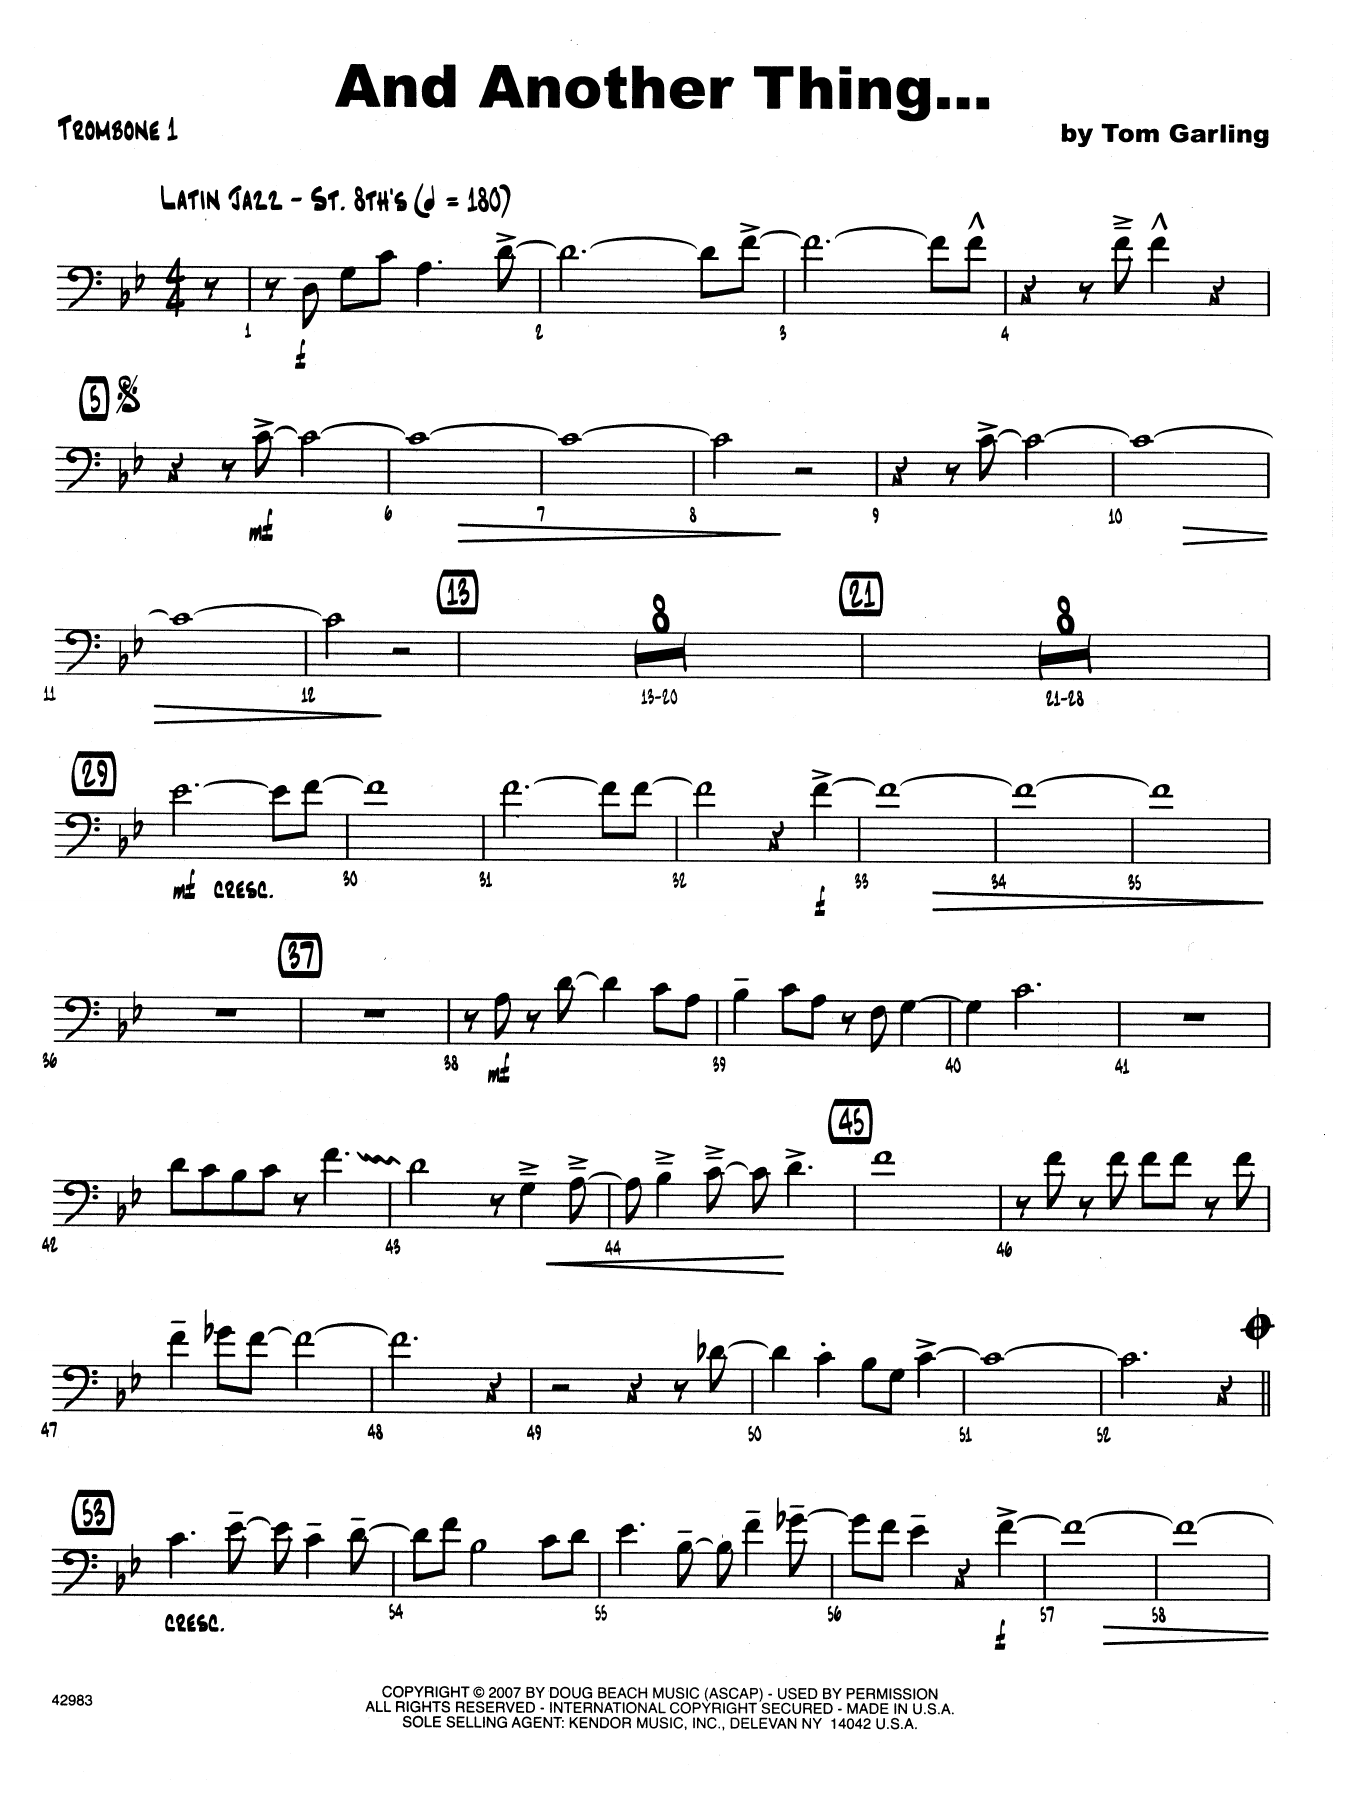 Download Tom Garling And Another Thing - 1st Trombone Sheet Music